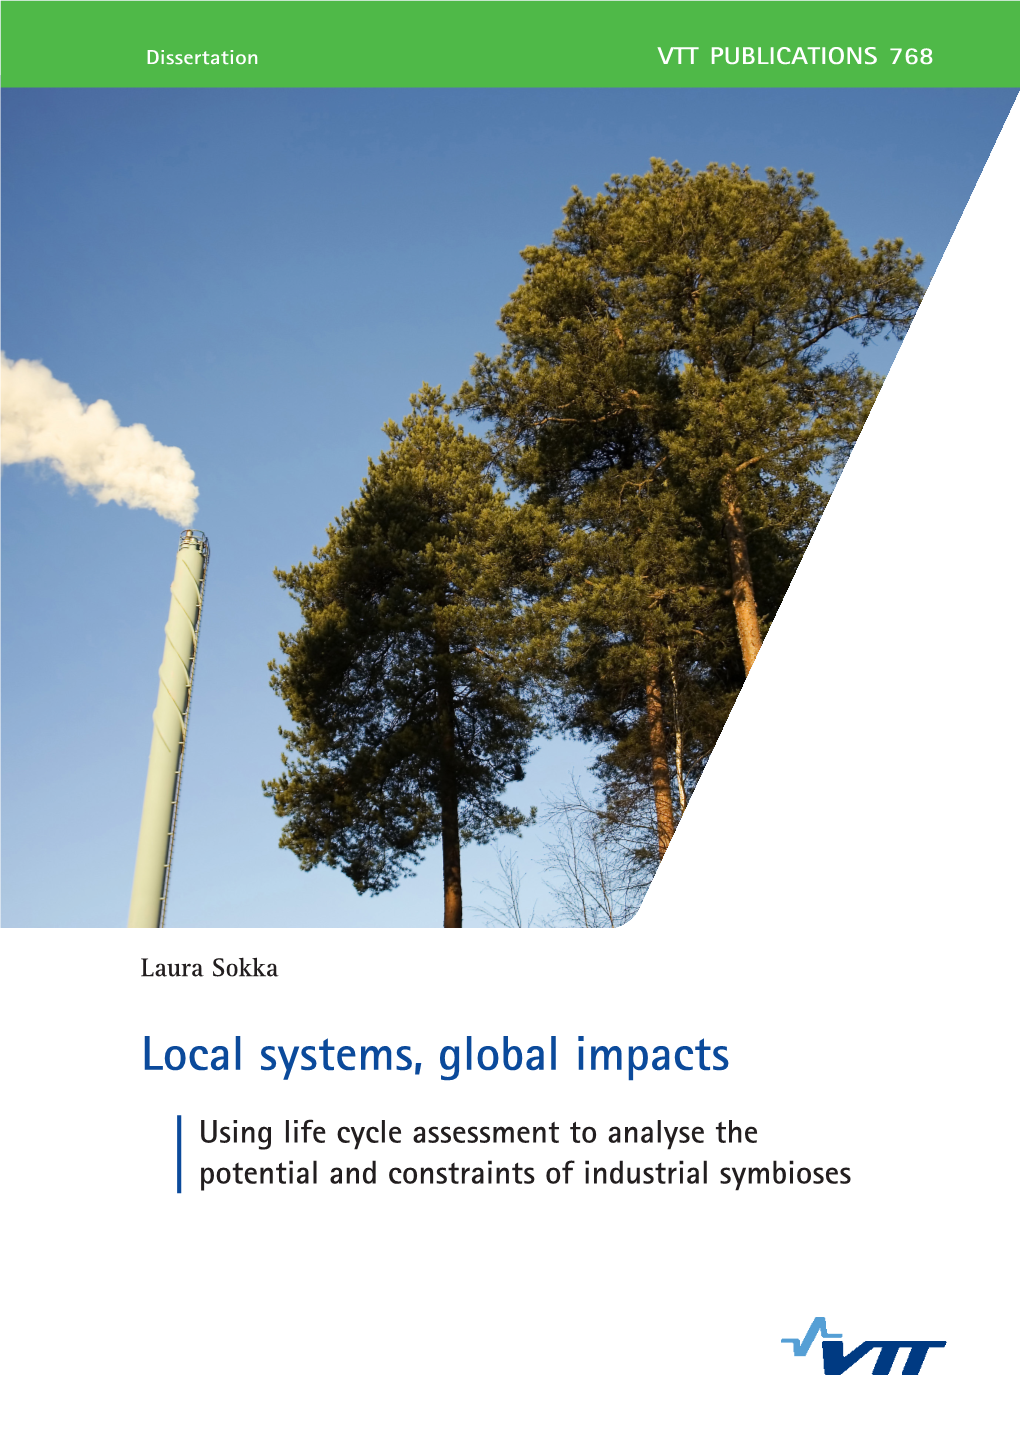 Local Systems, Global Impacts. Using Life Cycle Assessment to Analyse the Potential and Constraints of Industrial Symbioses